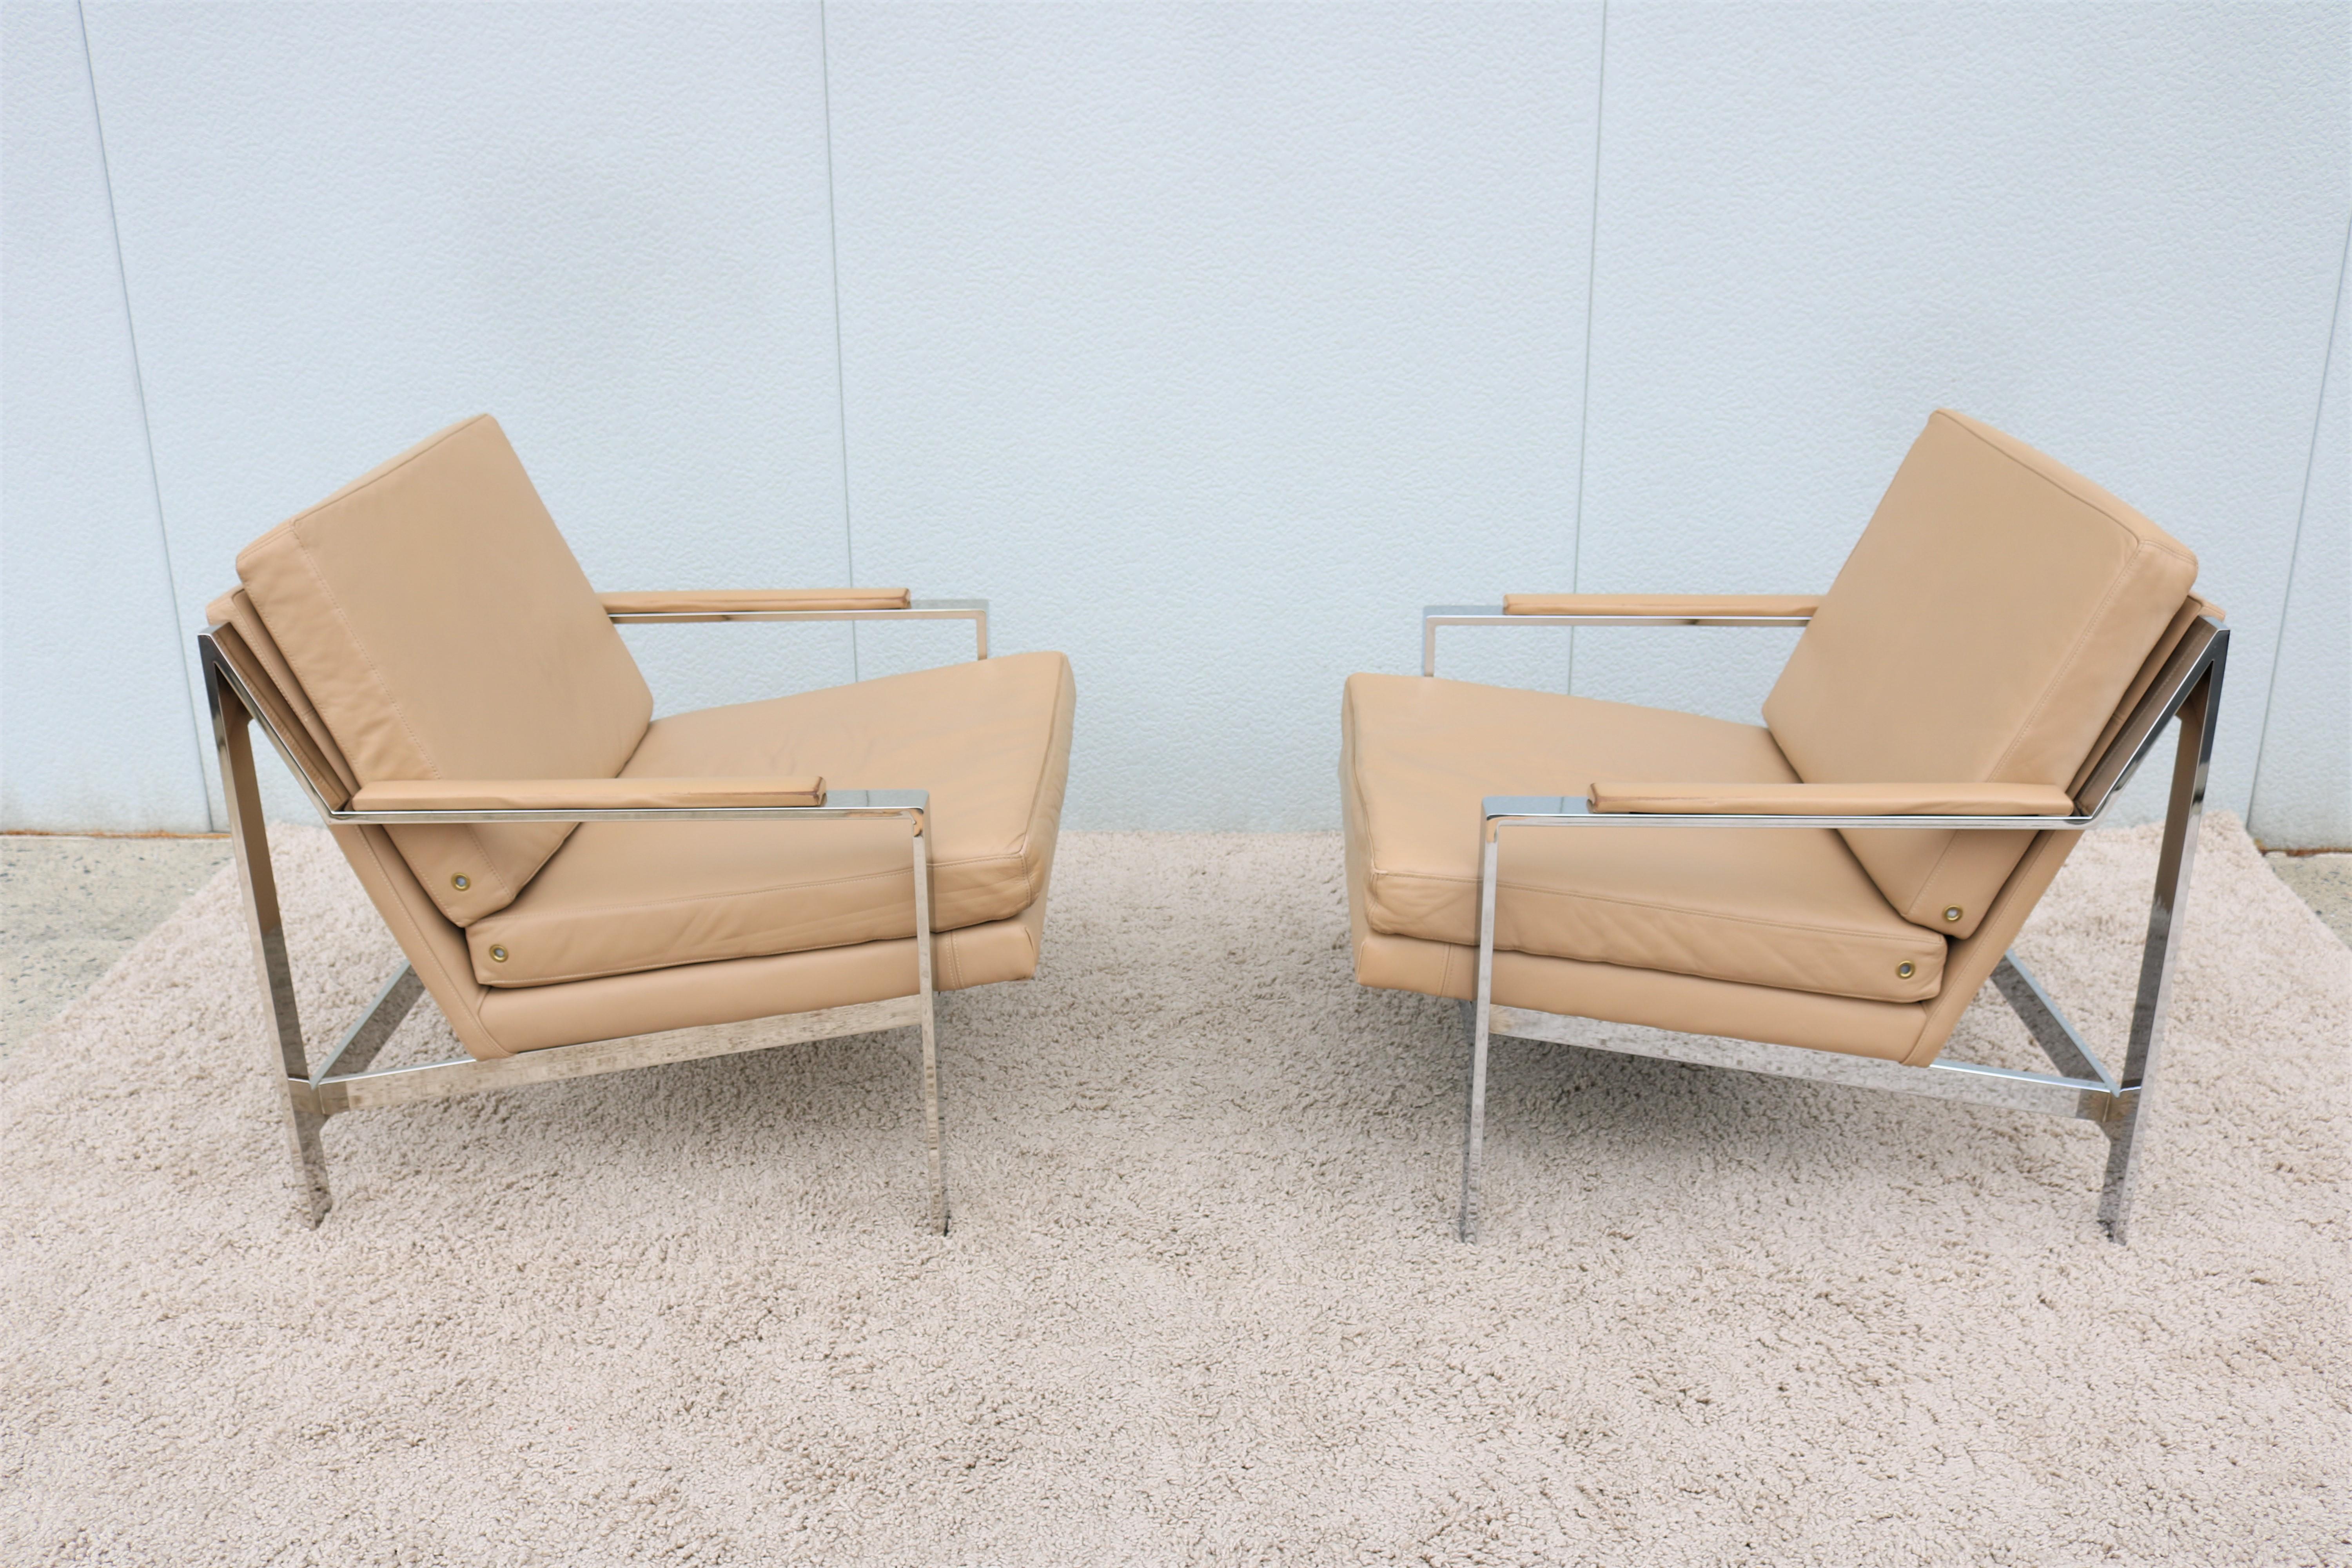 Vintage Cy Mann Leather and Chrome Lounge Chairs in Milo Baughman Style, a Pair For Sale 6